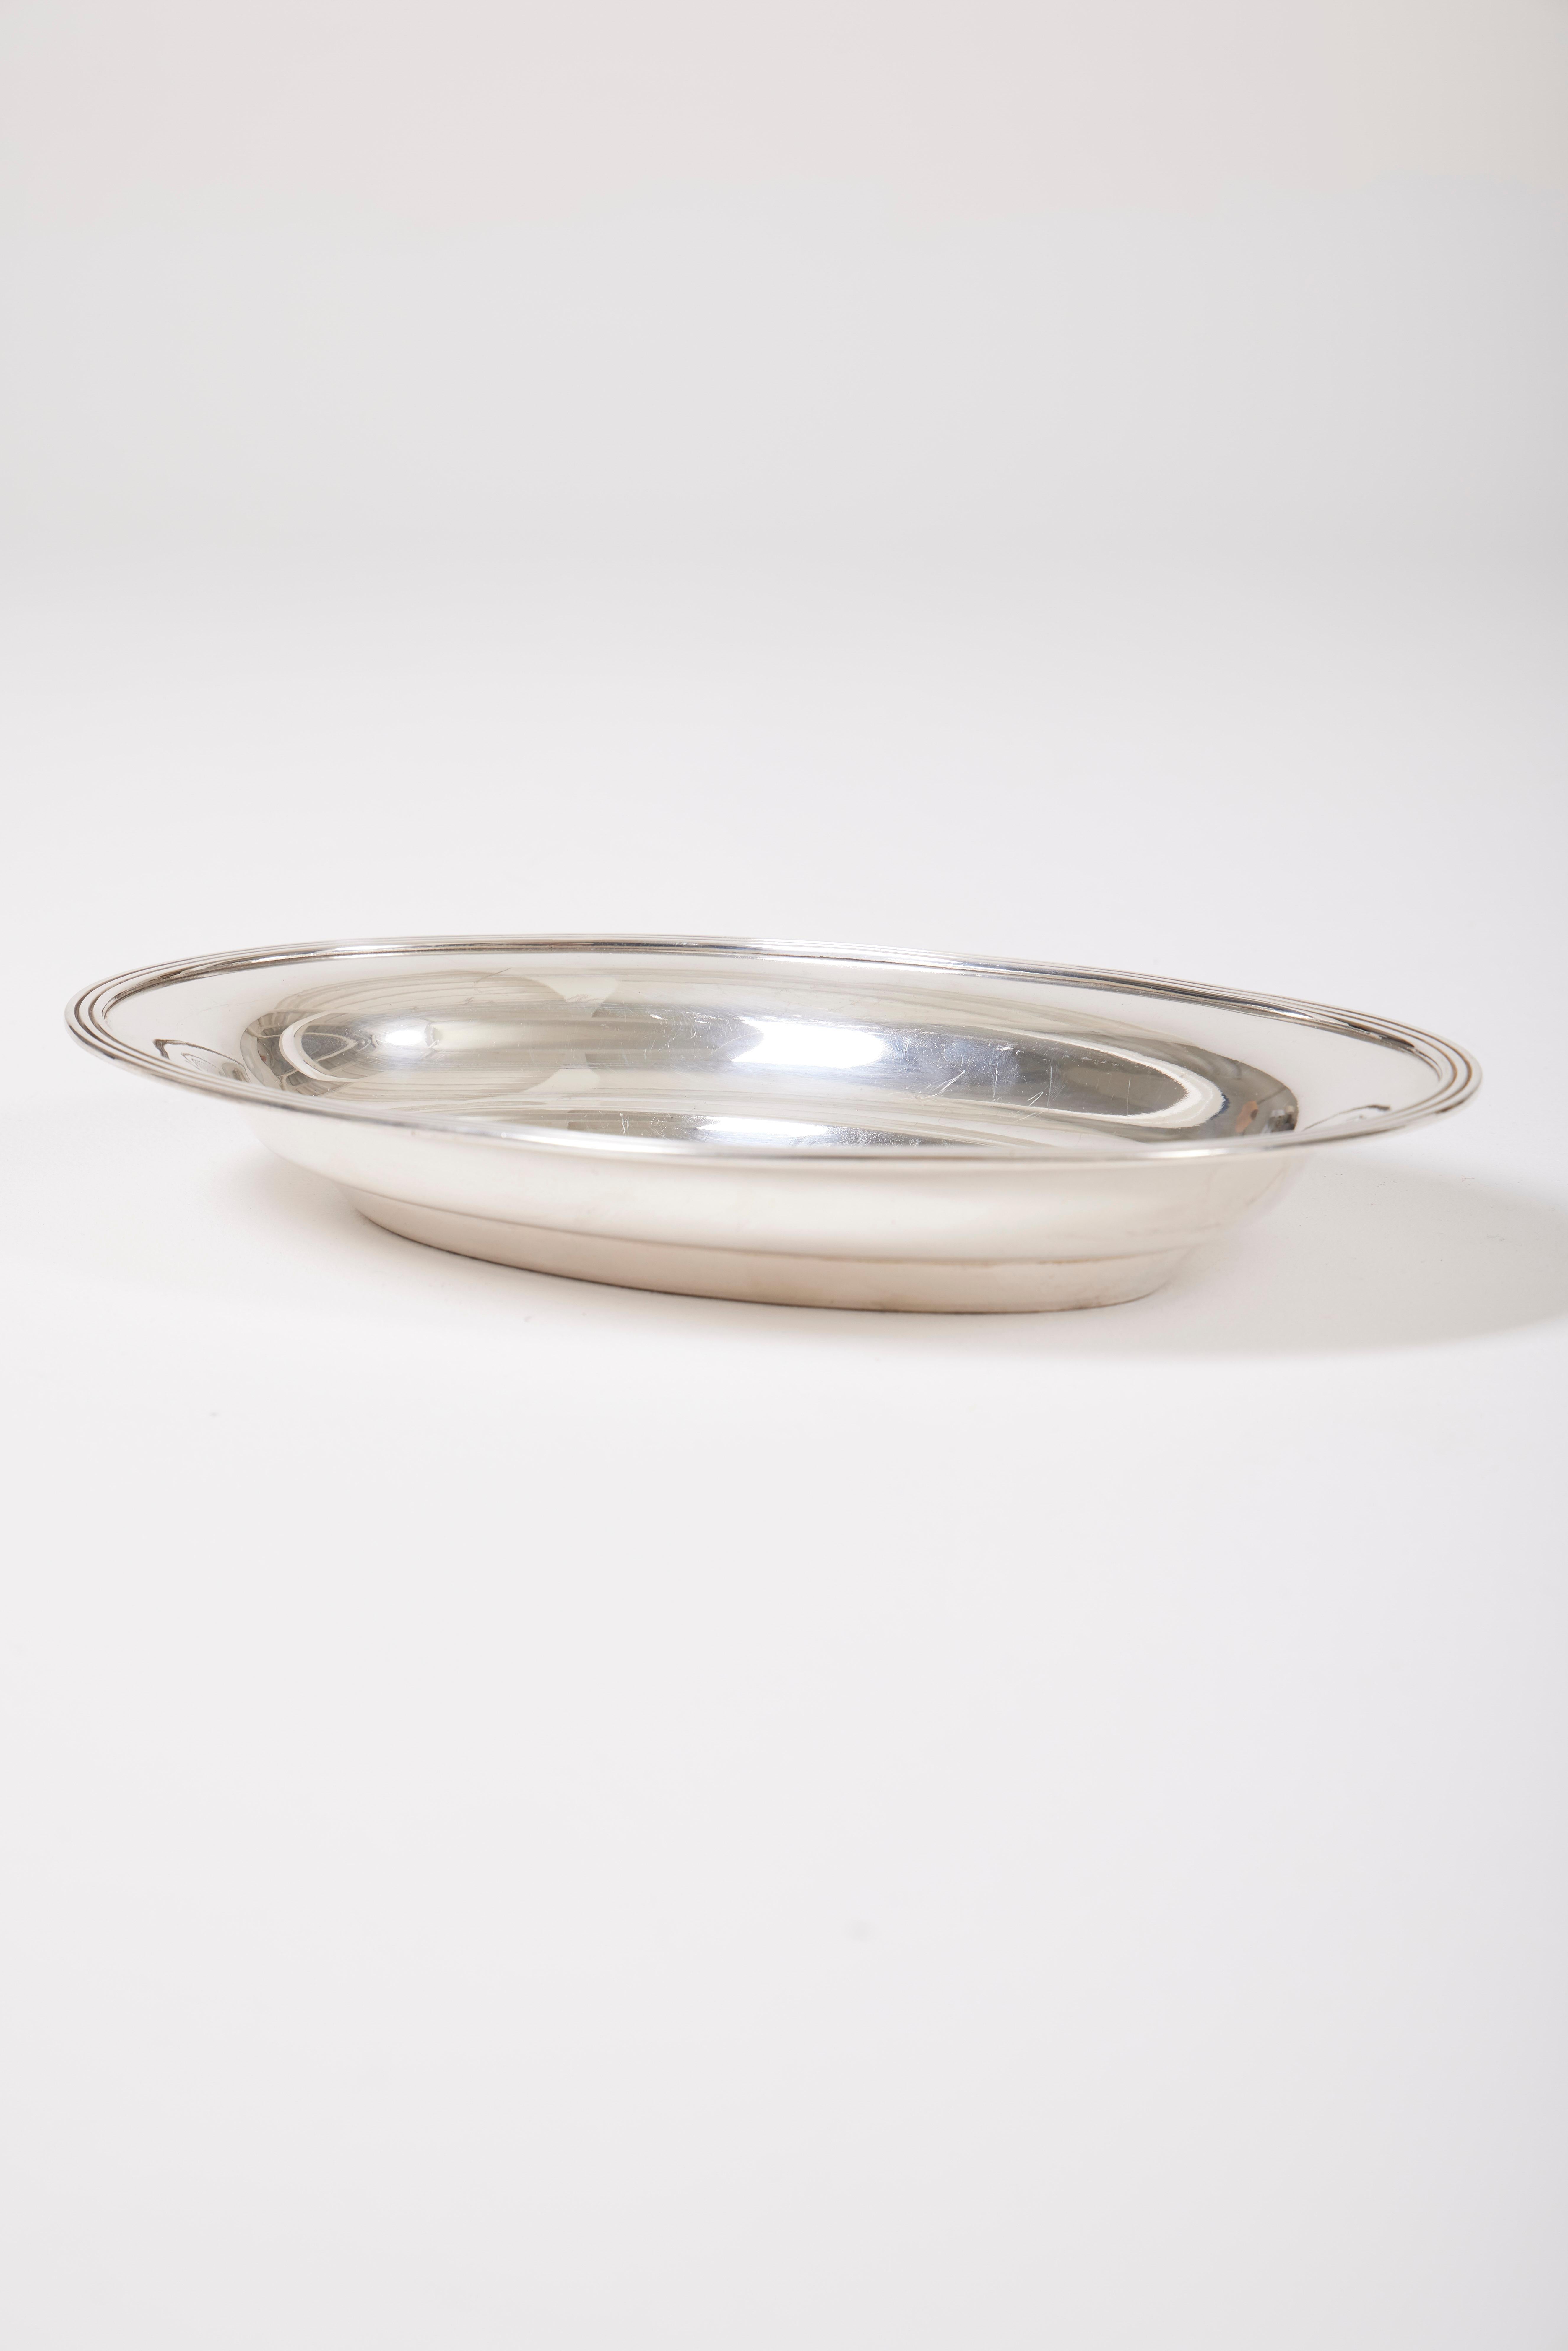 Oval silver-plated dish In Excellent Condition In PARIS, FR